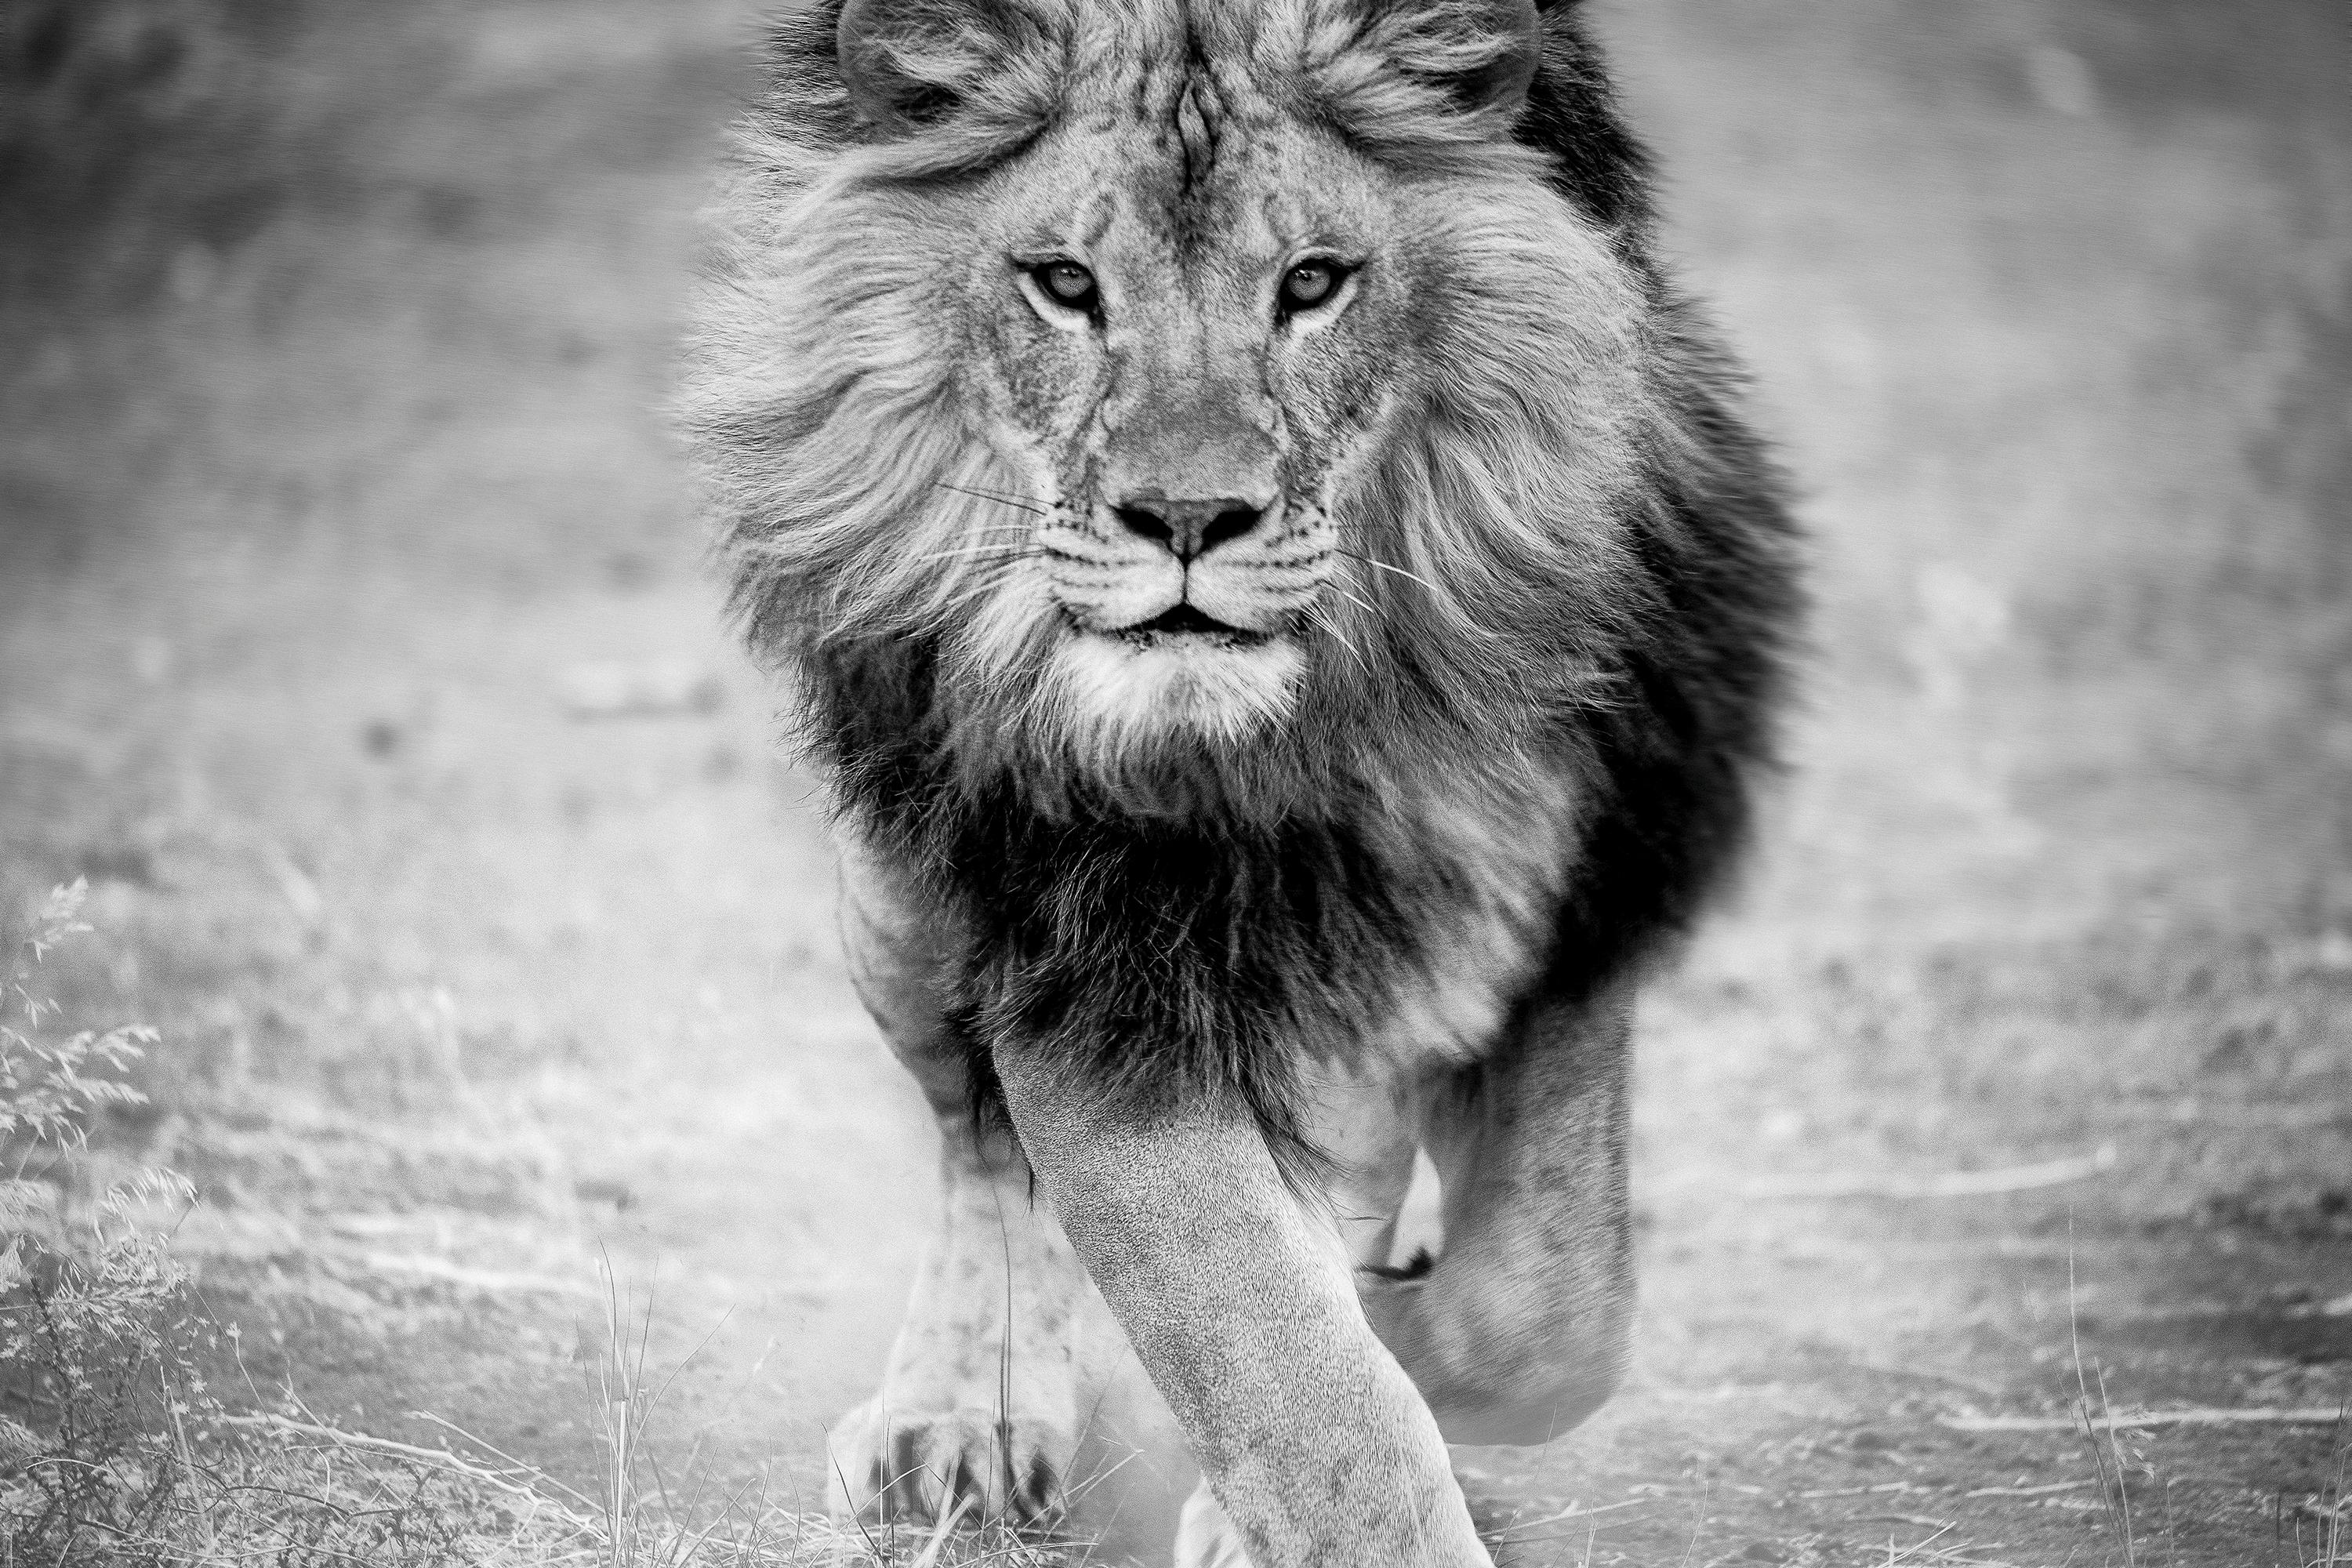 Shane Russeck Black and White Photograph - "Panthera Leo" 28x40 - Lion Photography Black & White Photograph, Signed Print